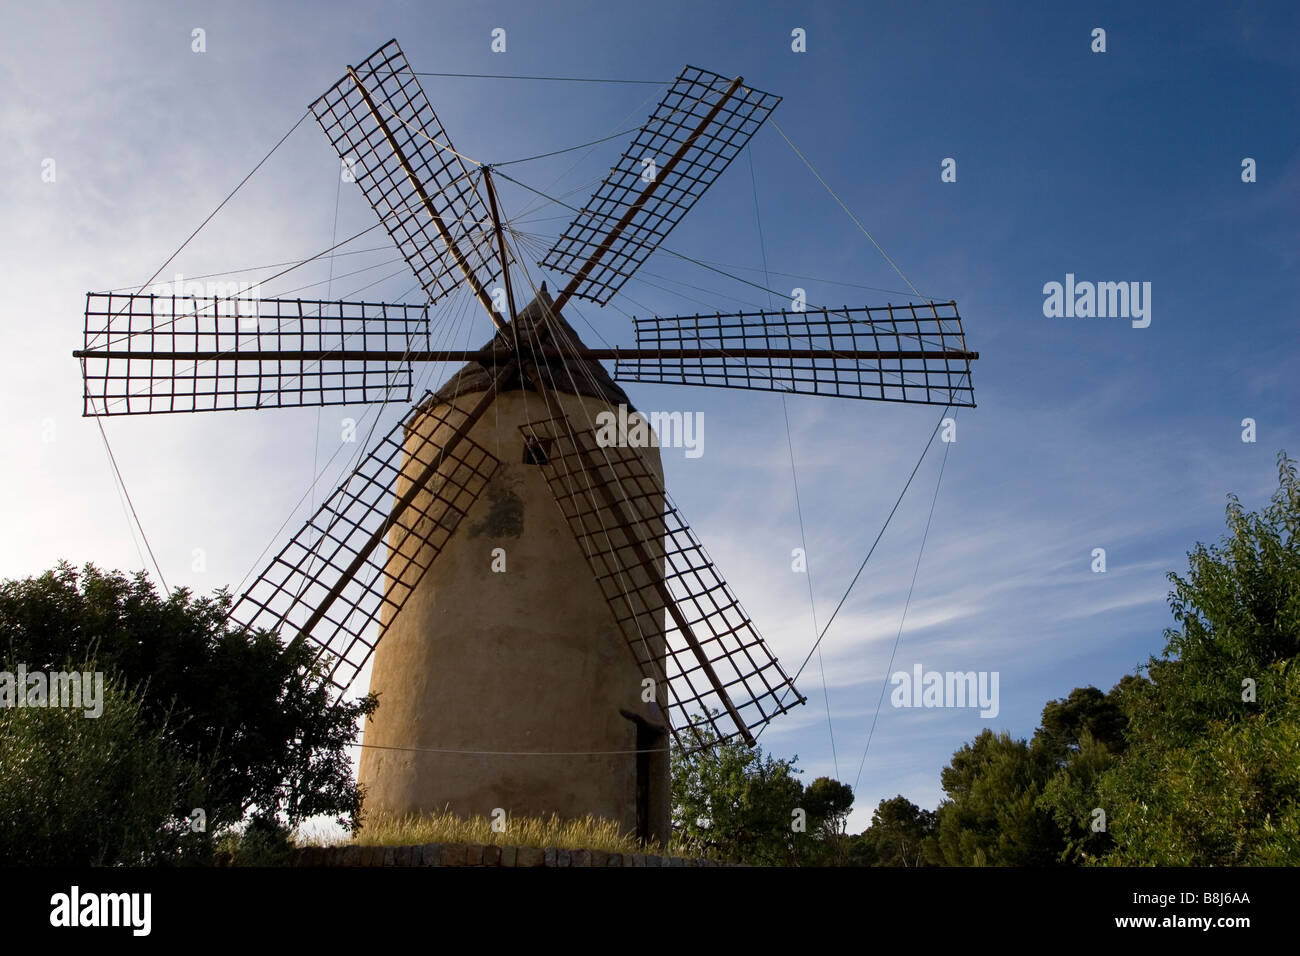 The restored windmill in the Mallorcan town of Andratx, known locally as the Moli Sa Planete. Stock Photo